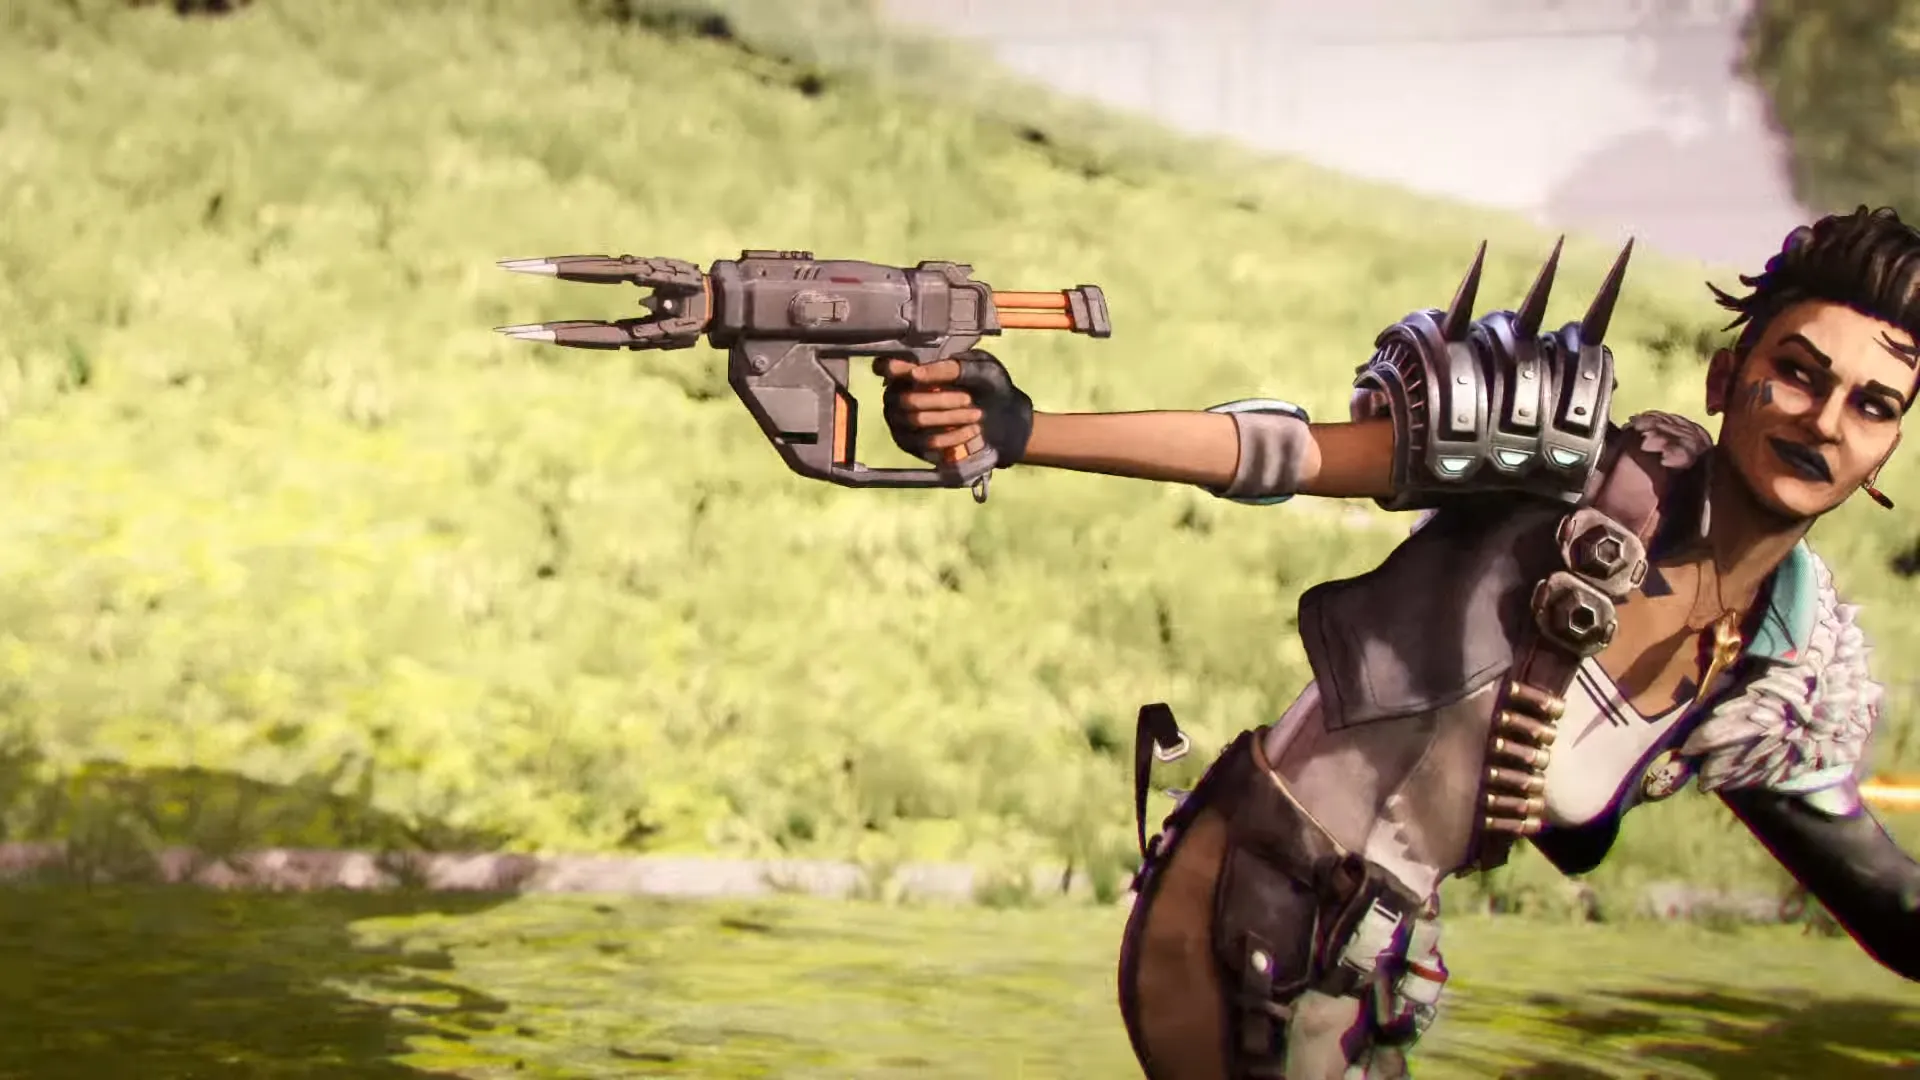 Apex Legends Defiance trailer gives first look at Mad Maggie's abilities